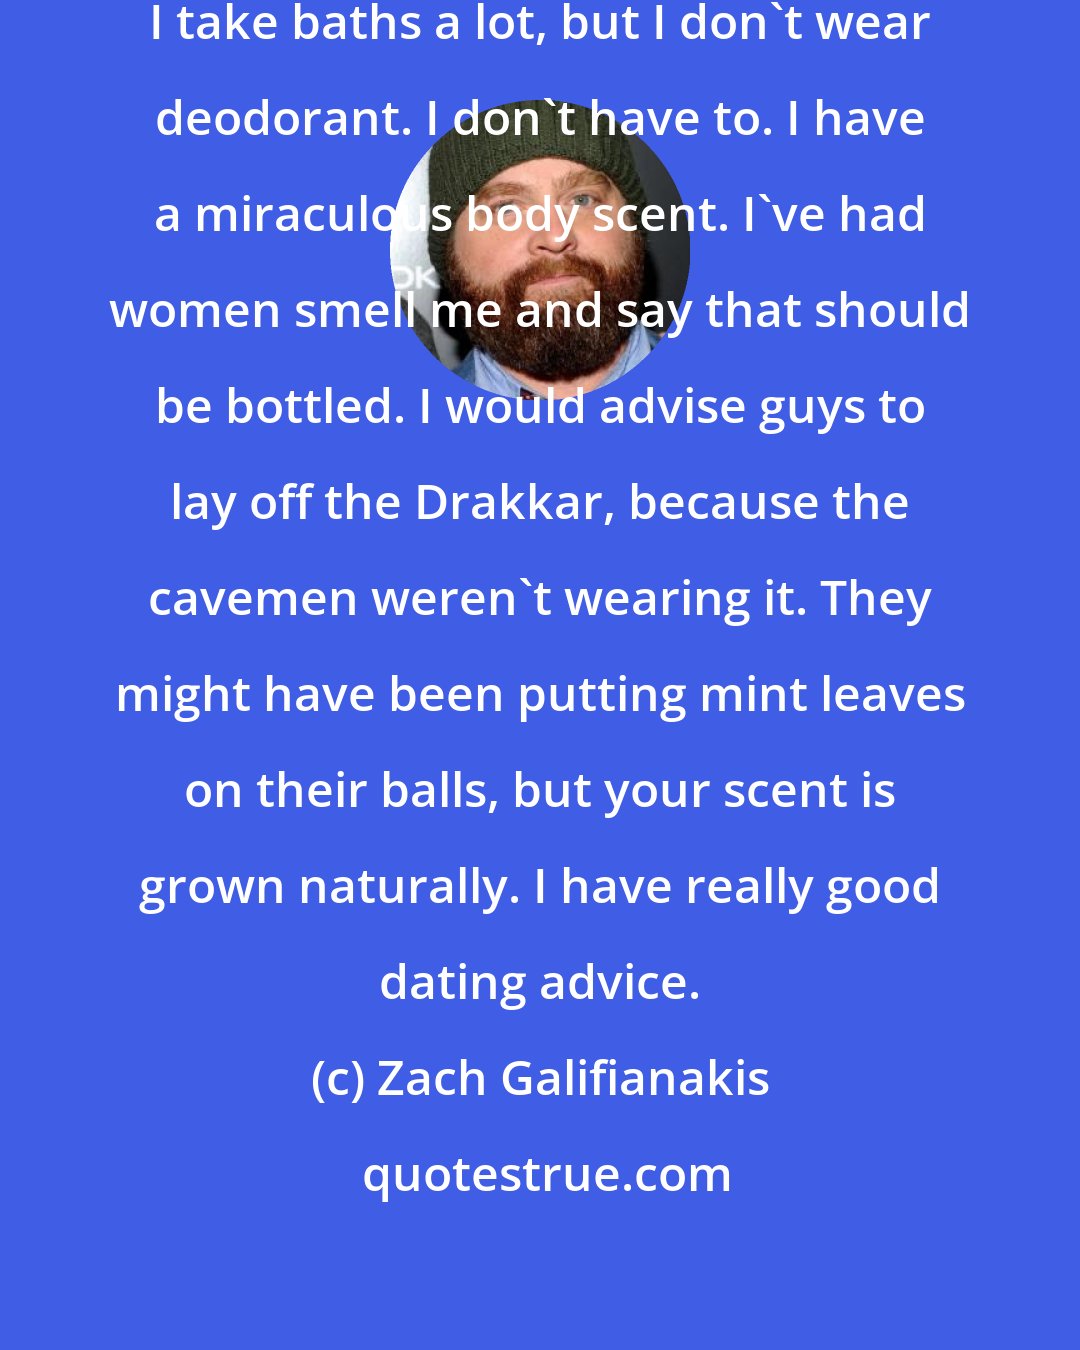 Zach Galifianakis: I have never been much of a groomer. I take baths a lot, but I don't wear deodorant. I don't have to. I have a miraculous body scent. I've had women smell me and say that should be bottled. I would advise guys to lay off the Drakkar, because the cavemen weren't wearing it. They might have been putting mint leaves on their balls, but your scent is grown naturally. I have really good dating advice.